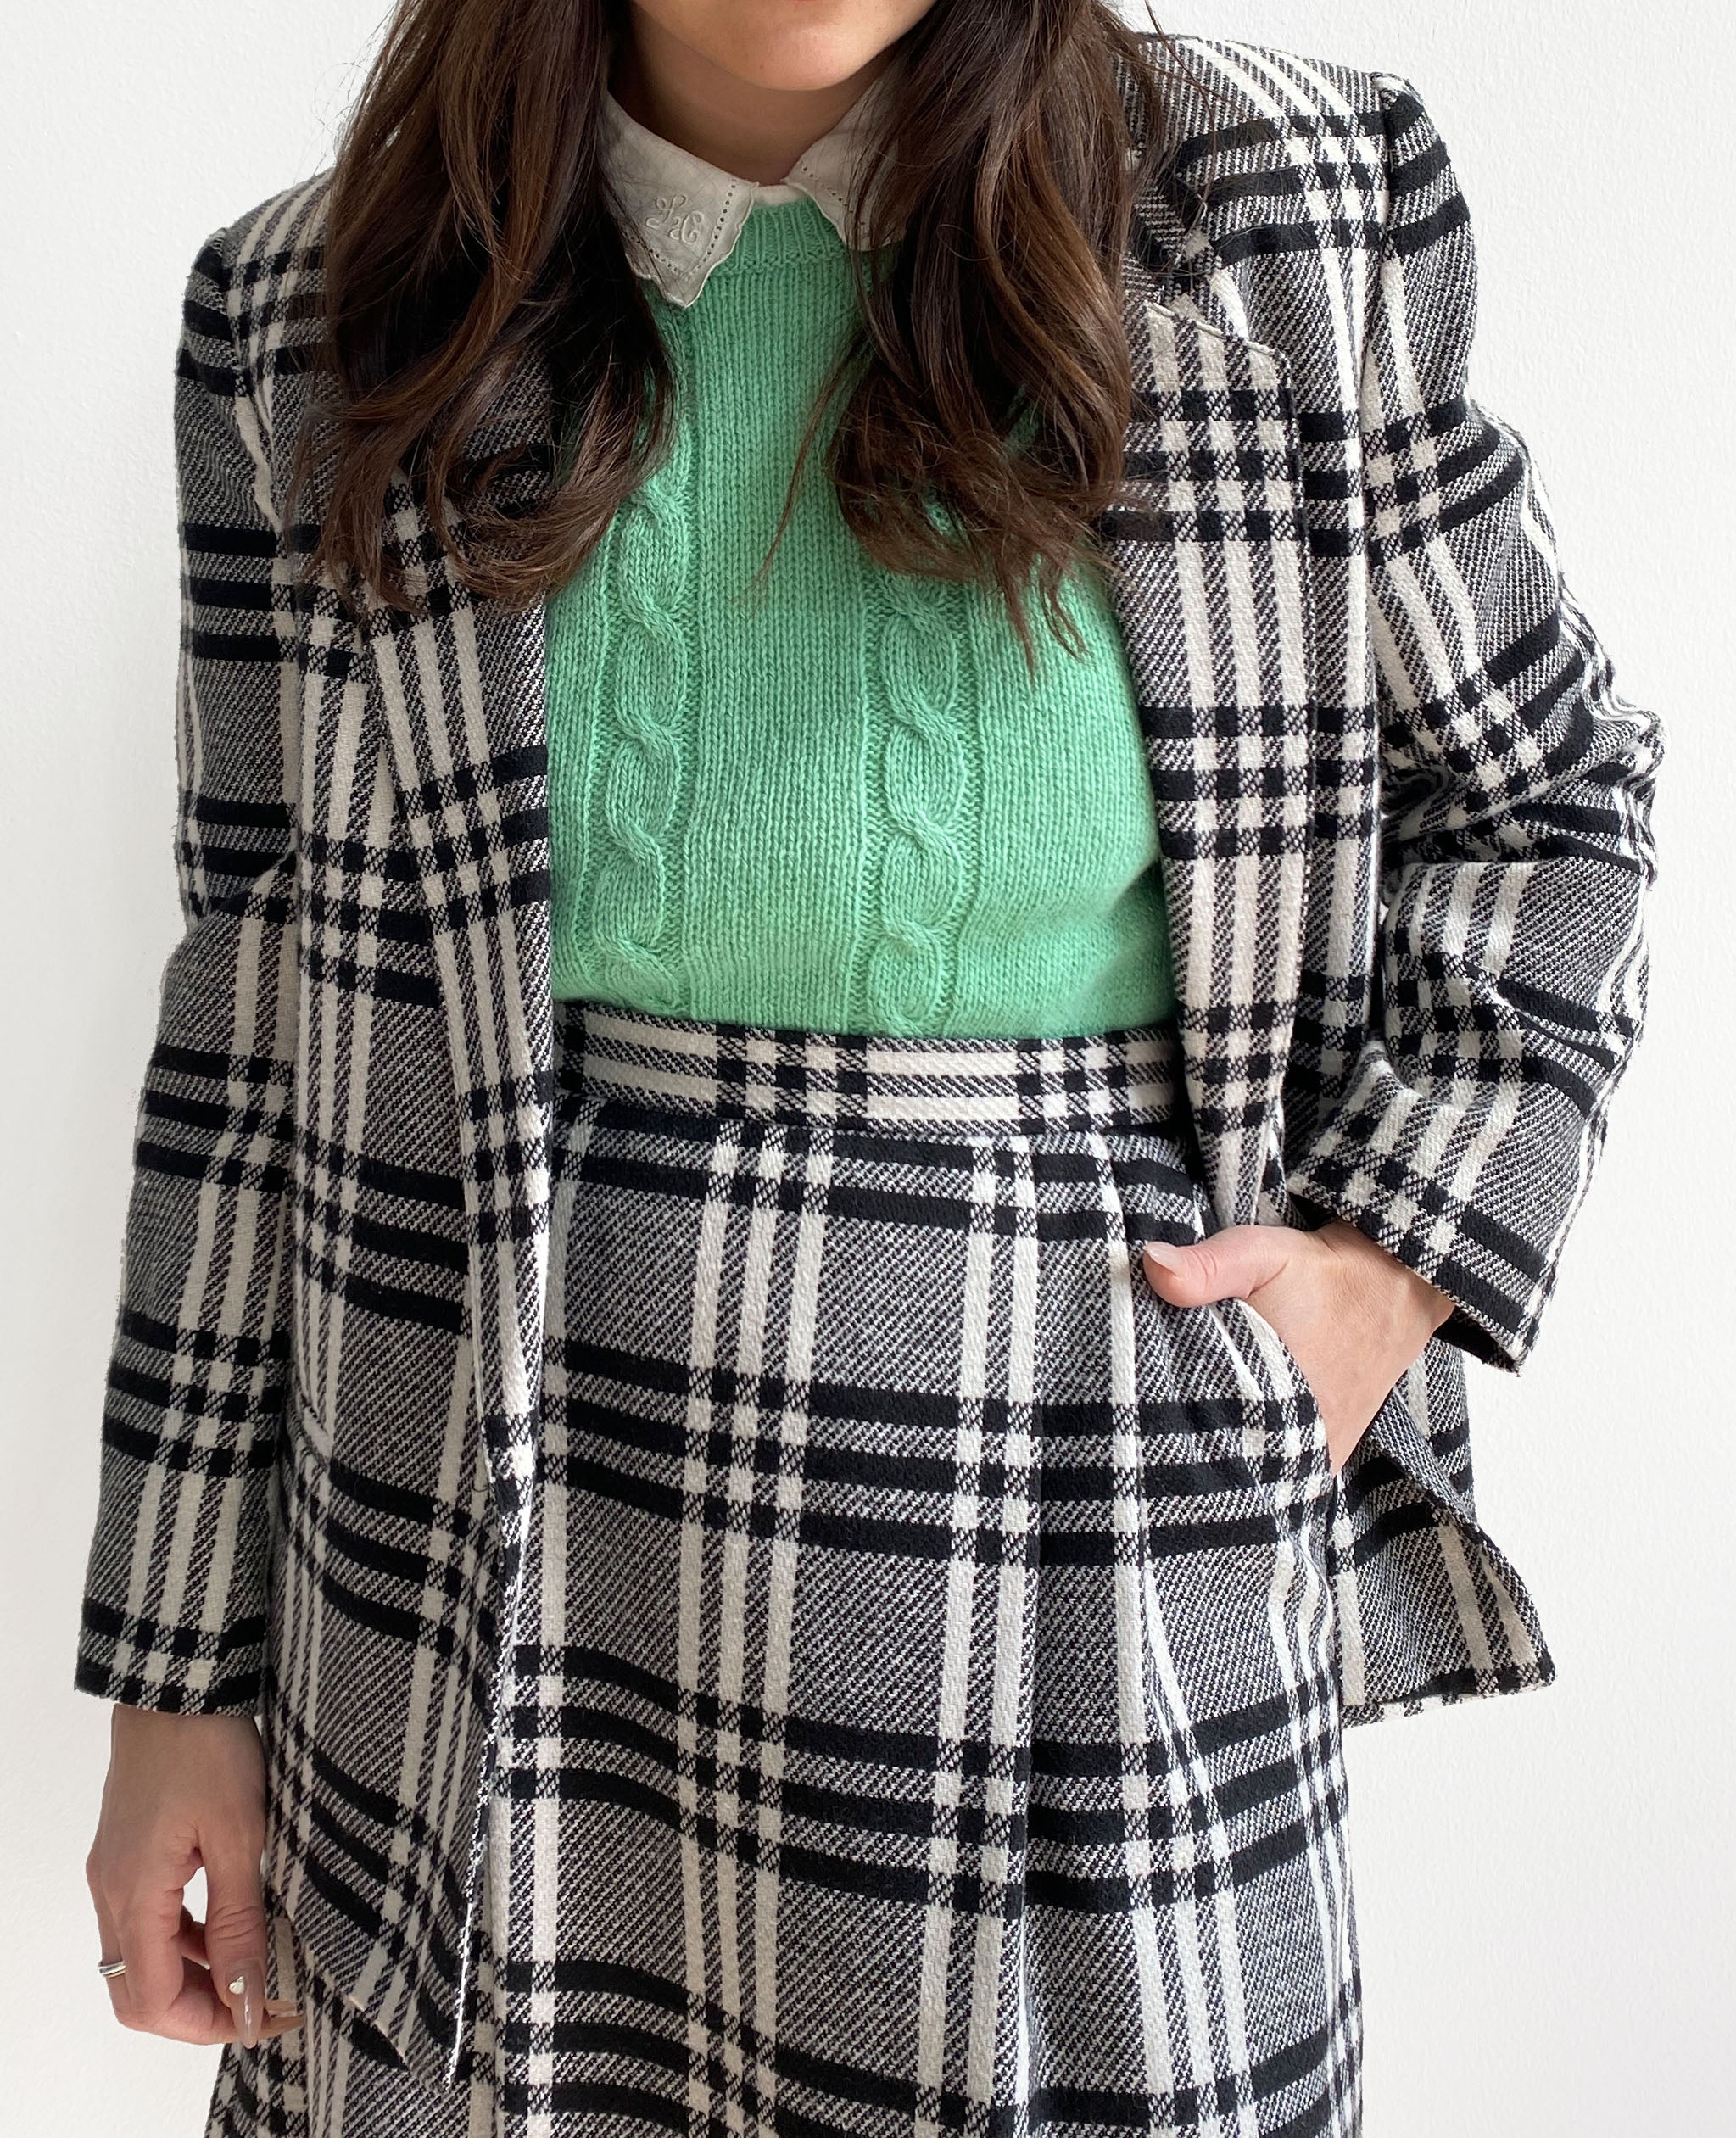 Black and White Checkered Skirt Suit